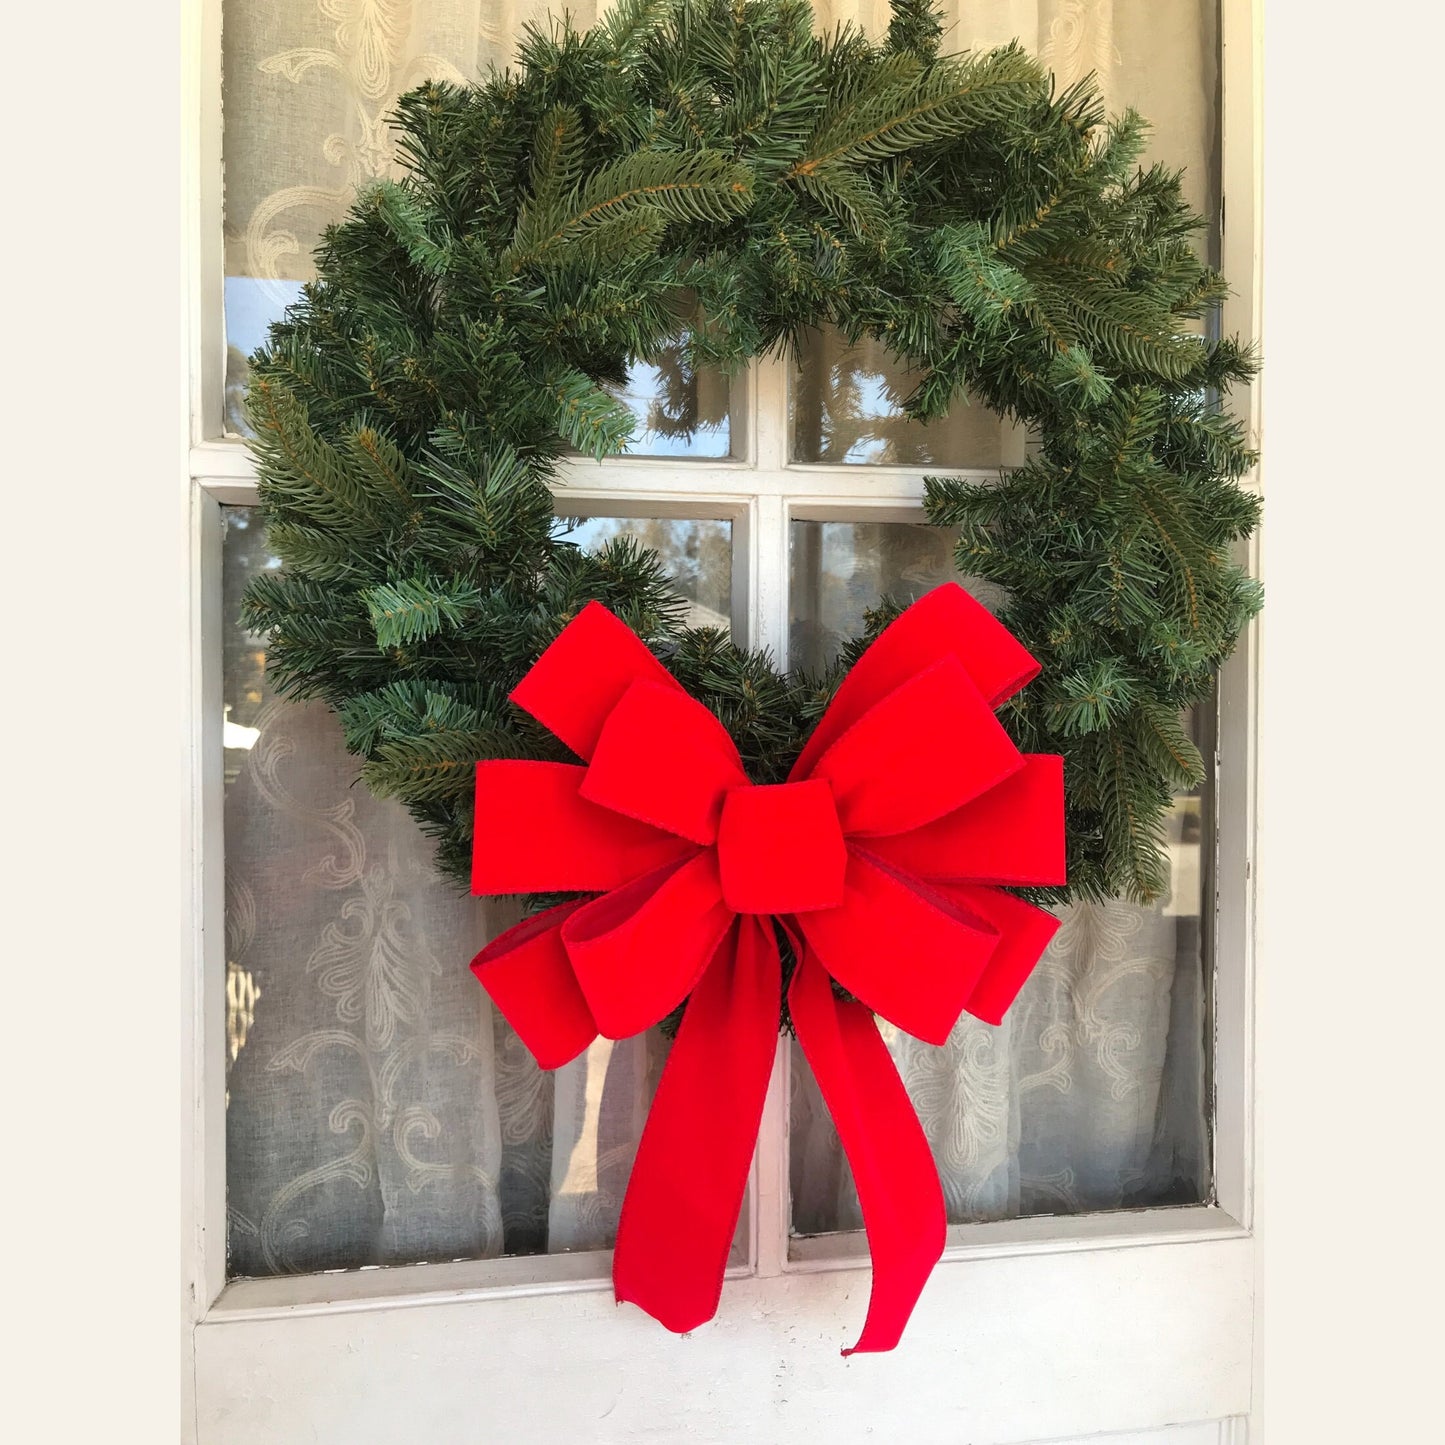 OUTDOOR Bright Red Velvet Christmas bow with liner